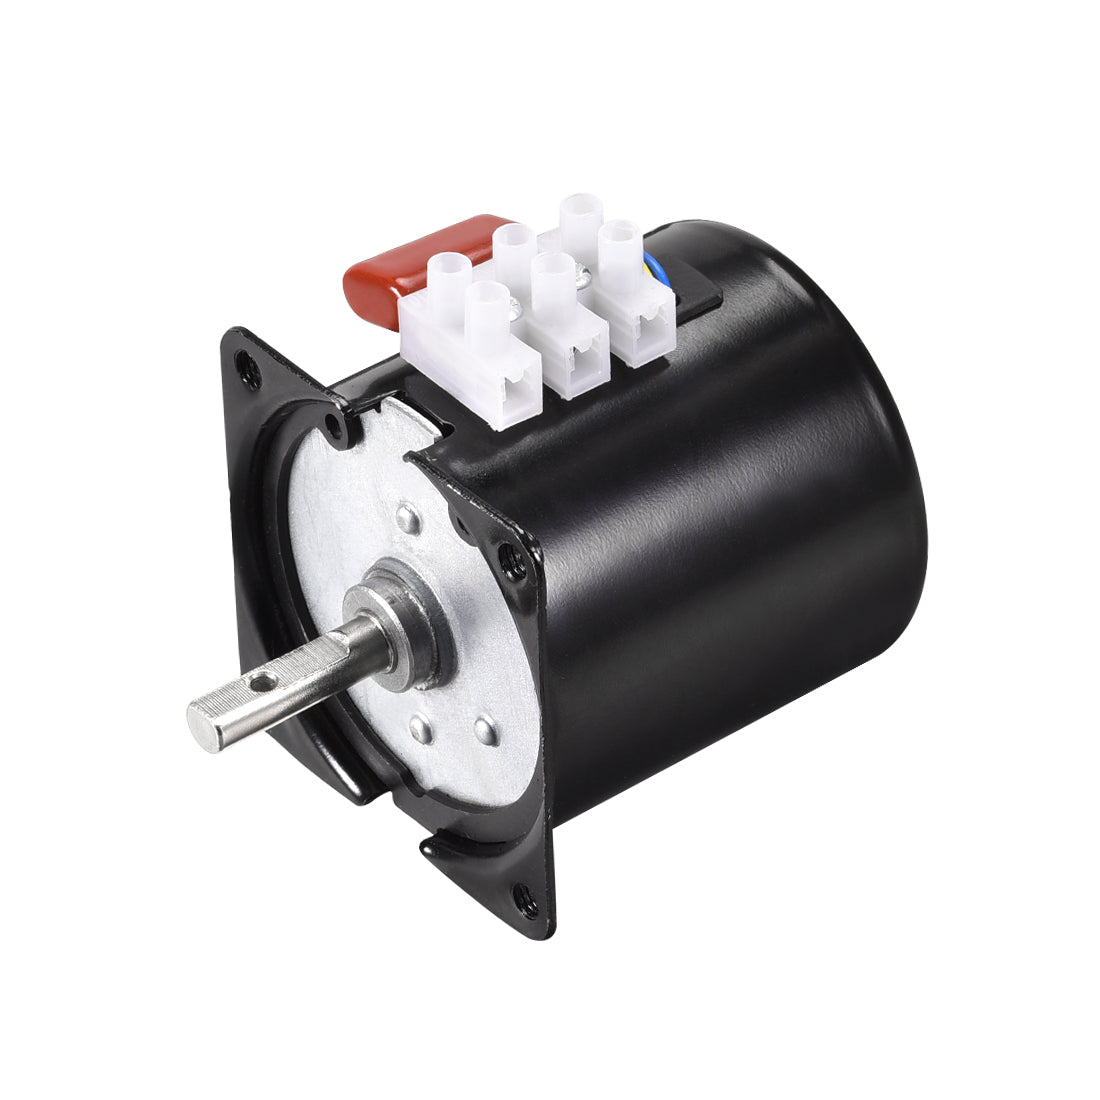 uxcell Uxcell AC 220V Electric Synchronous Motor Metal Gear Turntable /C 80RPM 50-60HZ 14W 7mm Dia Central Shaft with Hole